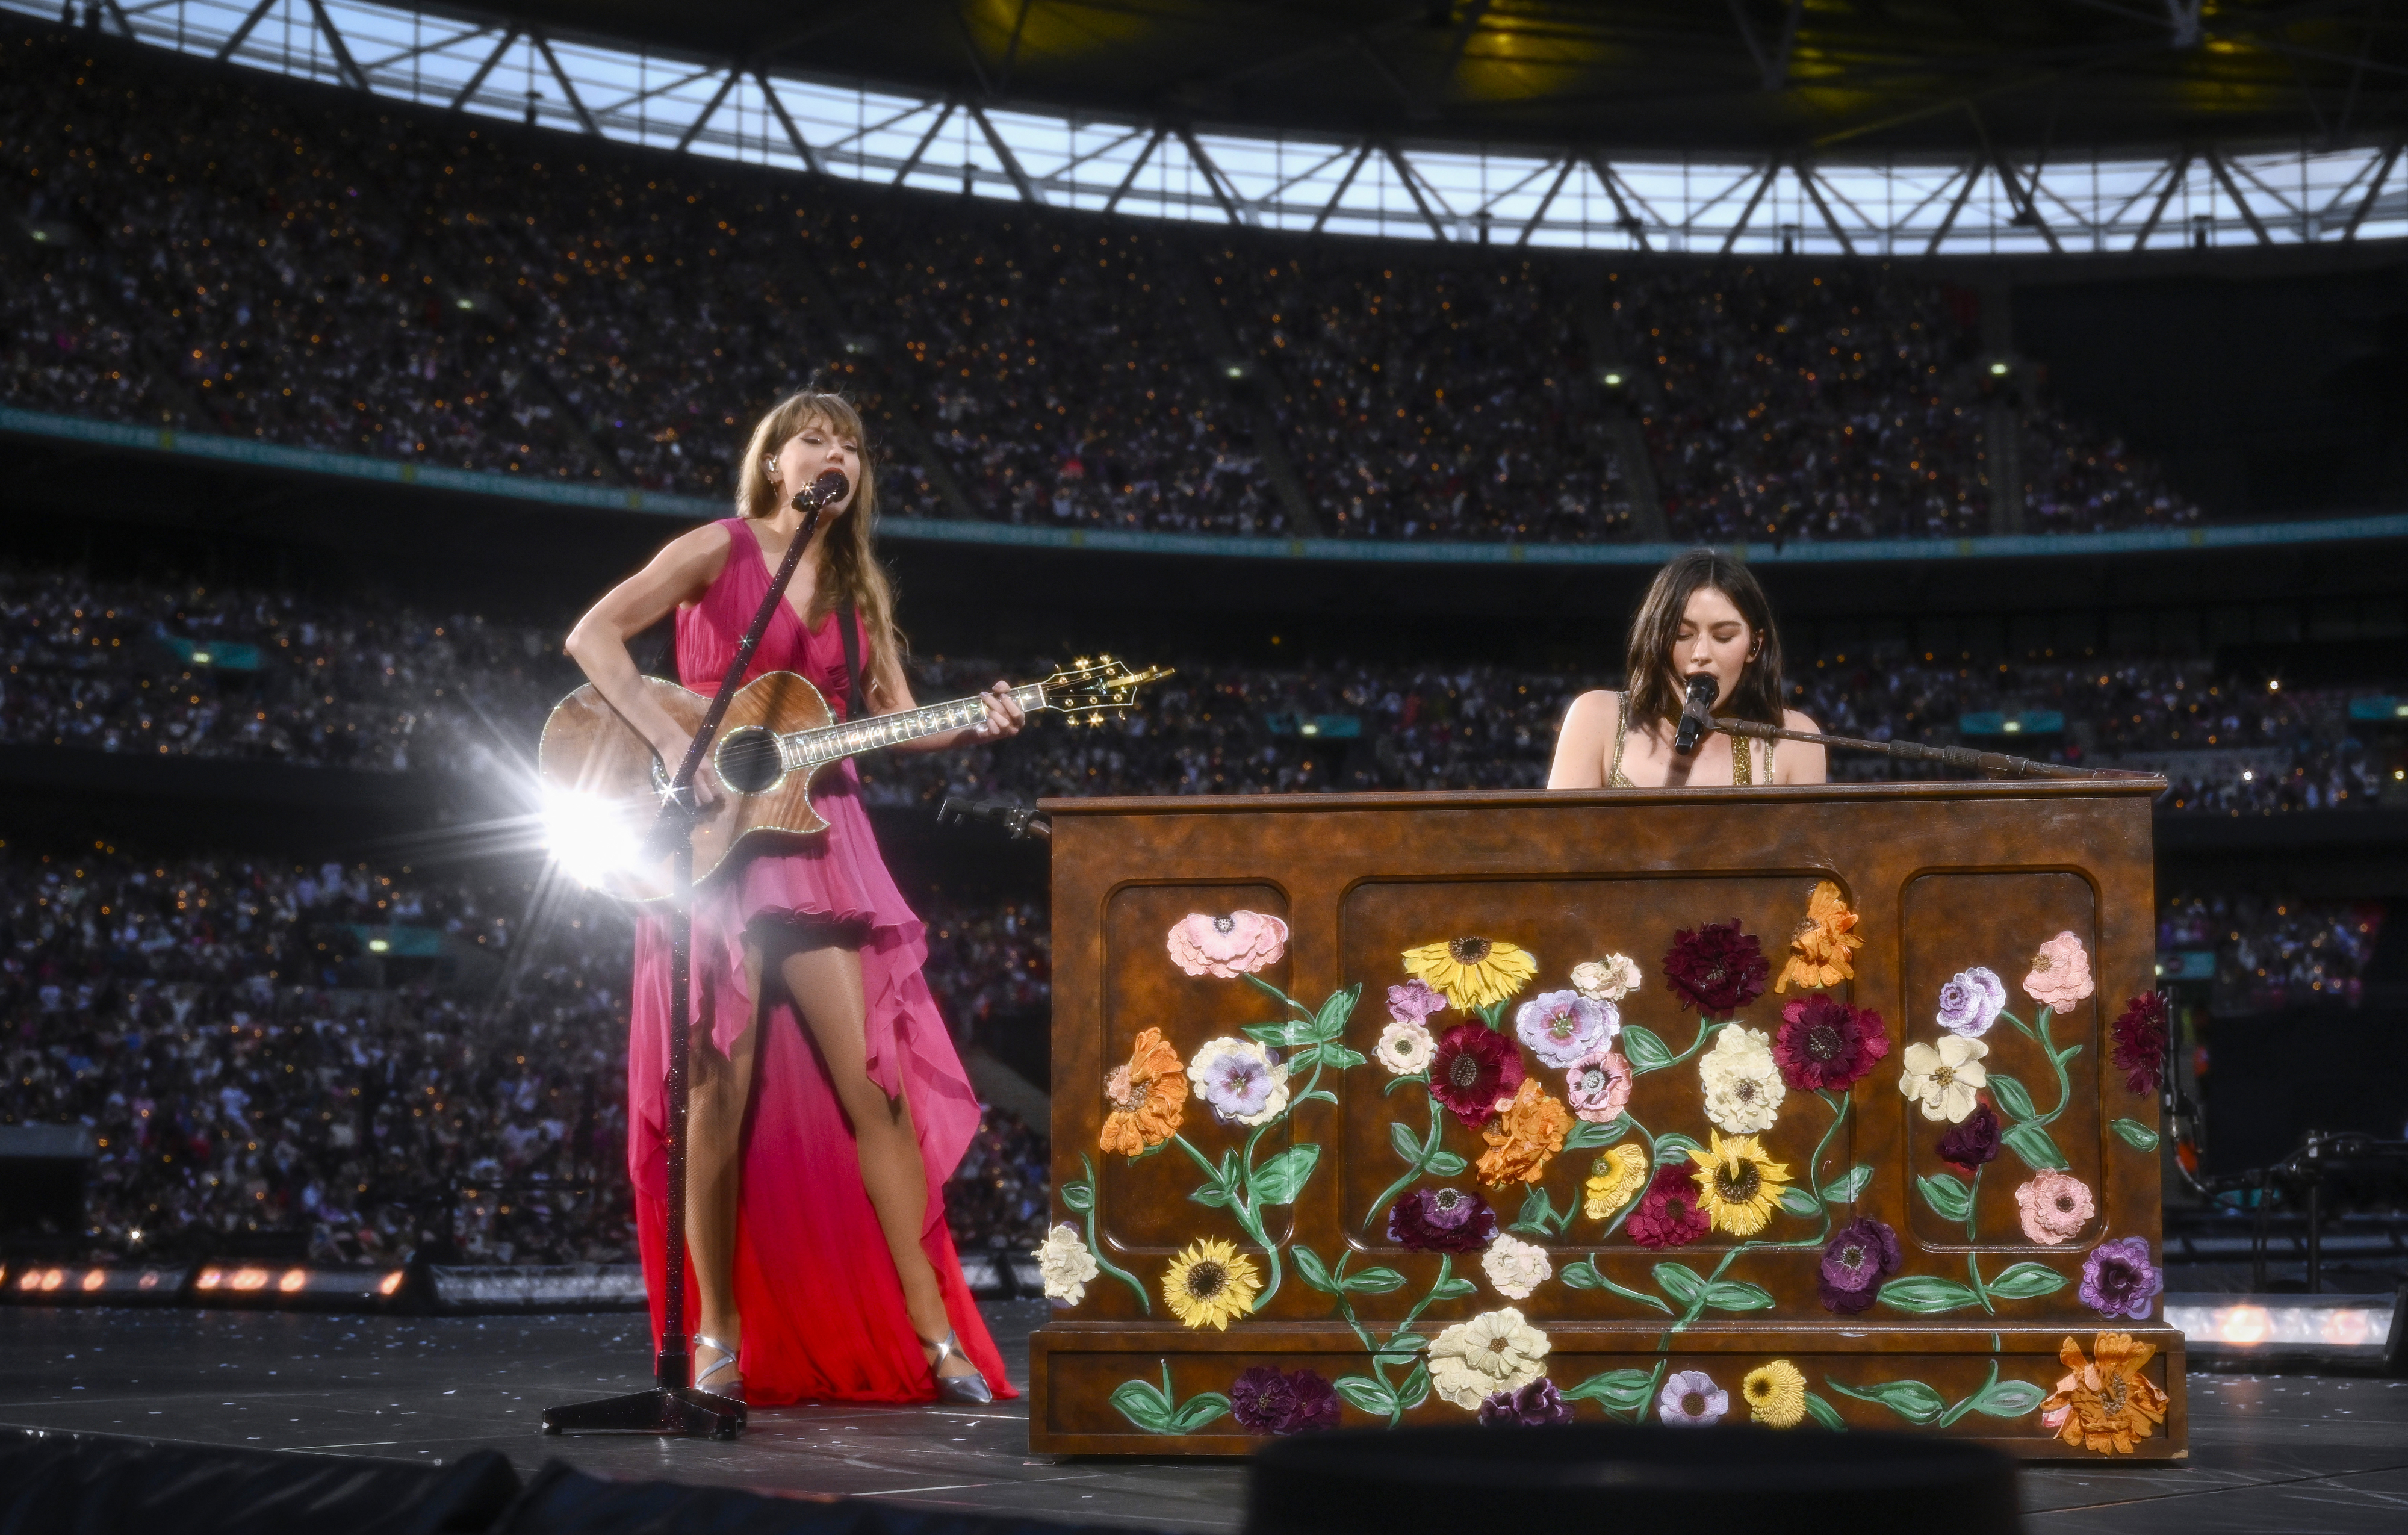 Taylor Swift, in a flowing dress with a high slit, sings and plays guitar on stage with Gracie Abrams playing a decorated piano at a concert